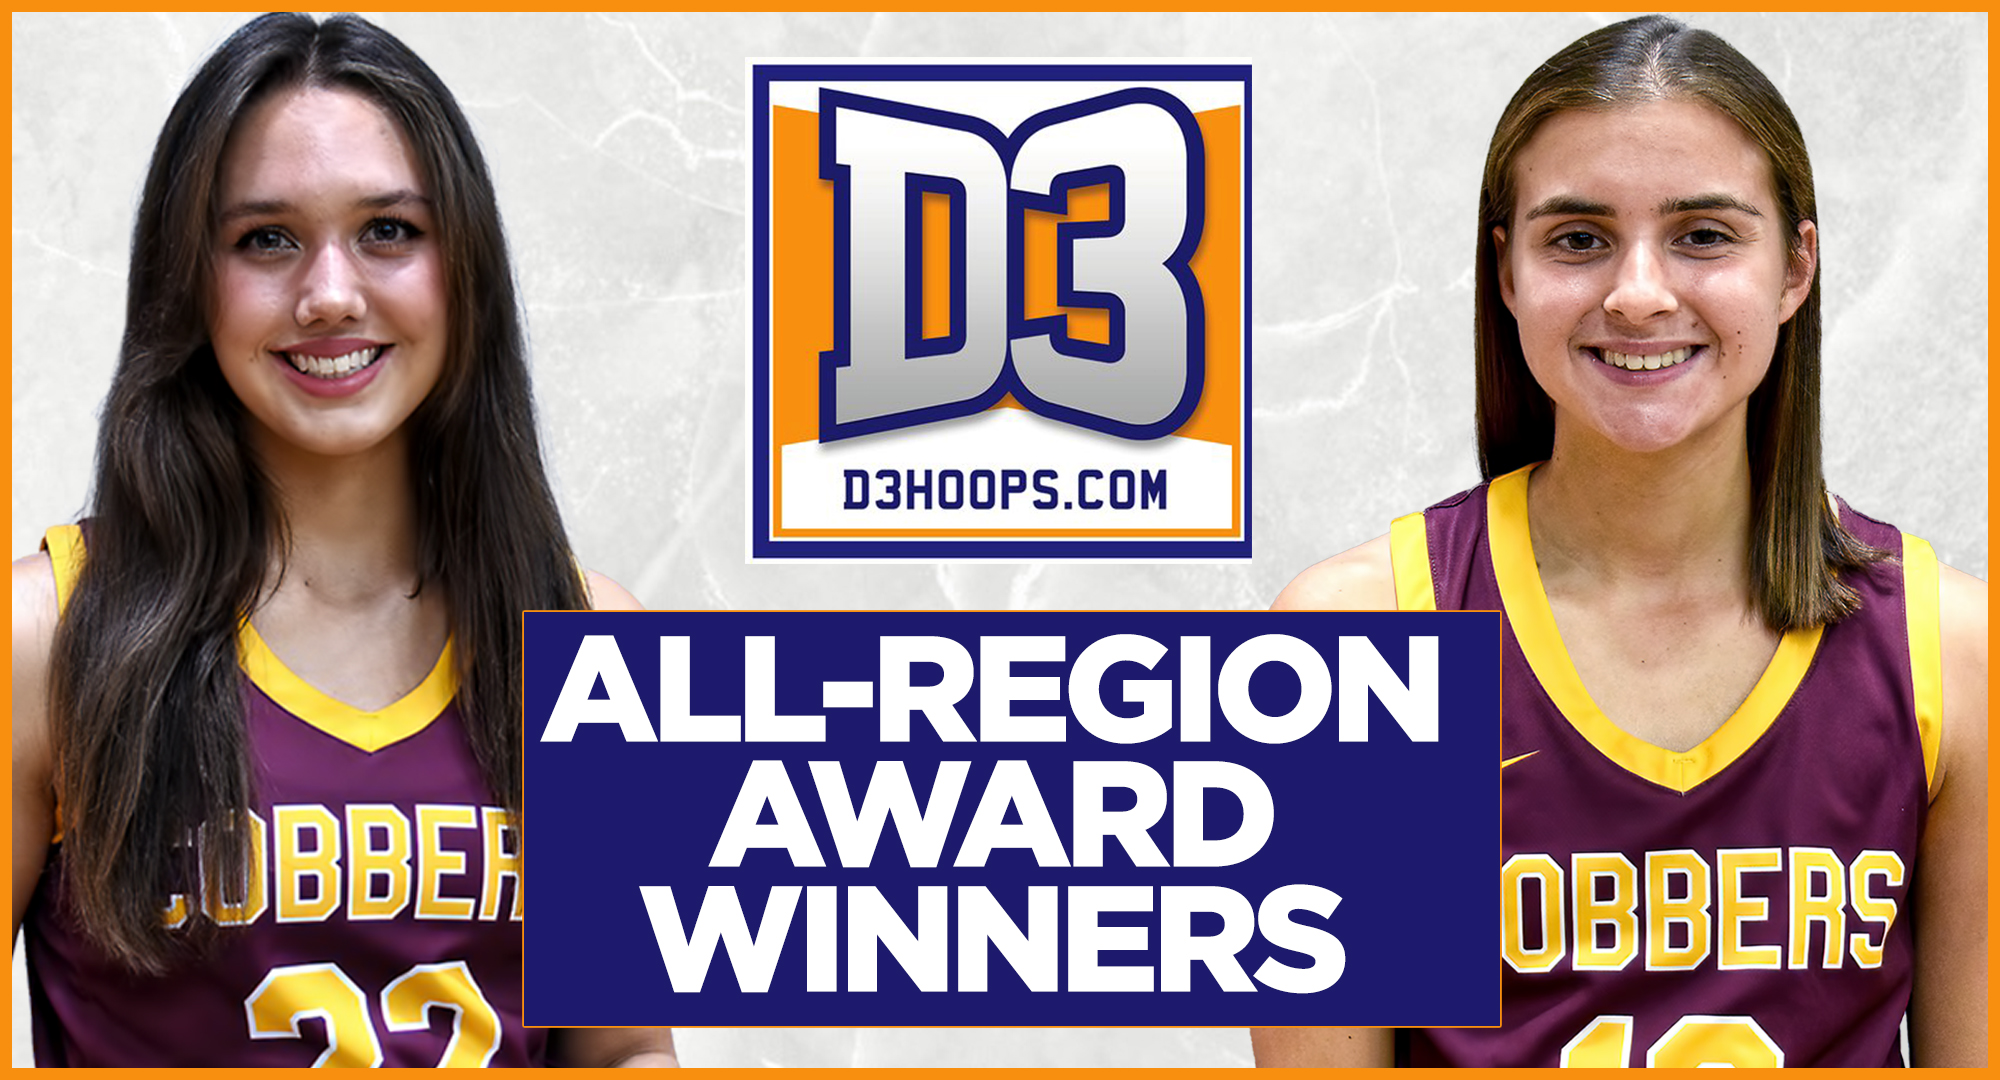 Concordia juniors Makayla Anderson and Carlee Sieben were named to the D3hoops.com All-Region 9 Second Team.